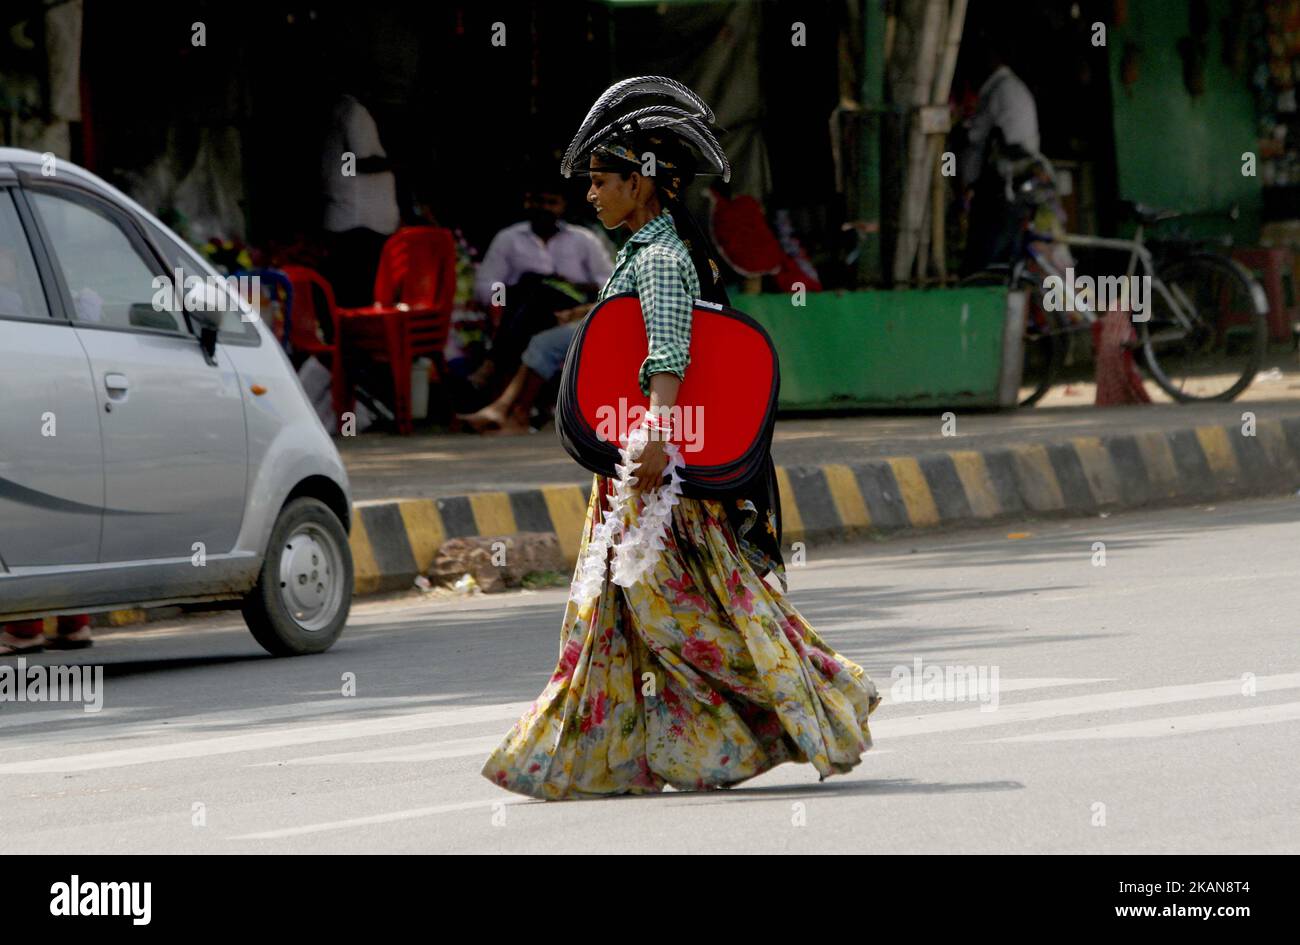 A nomadic woman holds Sun protective accessories and move in a traffic square to sale it to car drivers in a hot afternoon in the eastern Indian state Odisha's capital city Bhubaneswar, on May 24, 2017. (Photo by STR/NurPhoto) *** Please Use Credit from Credit Field *** Stock Photo